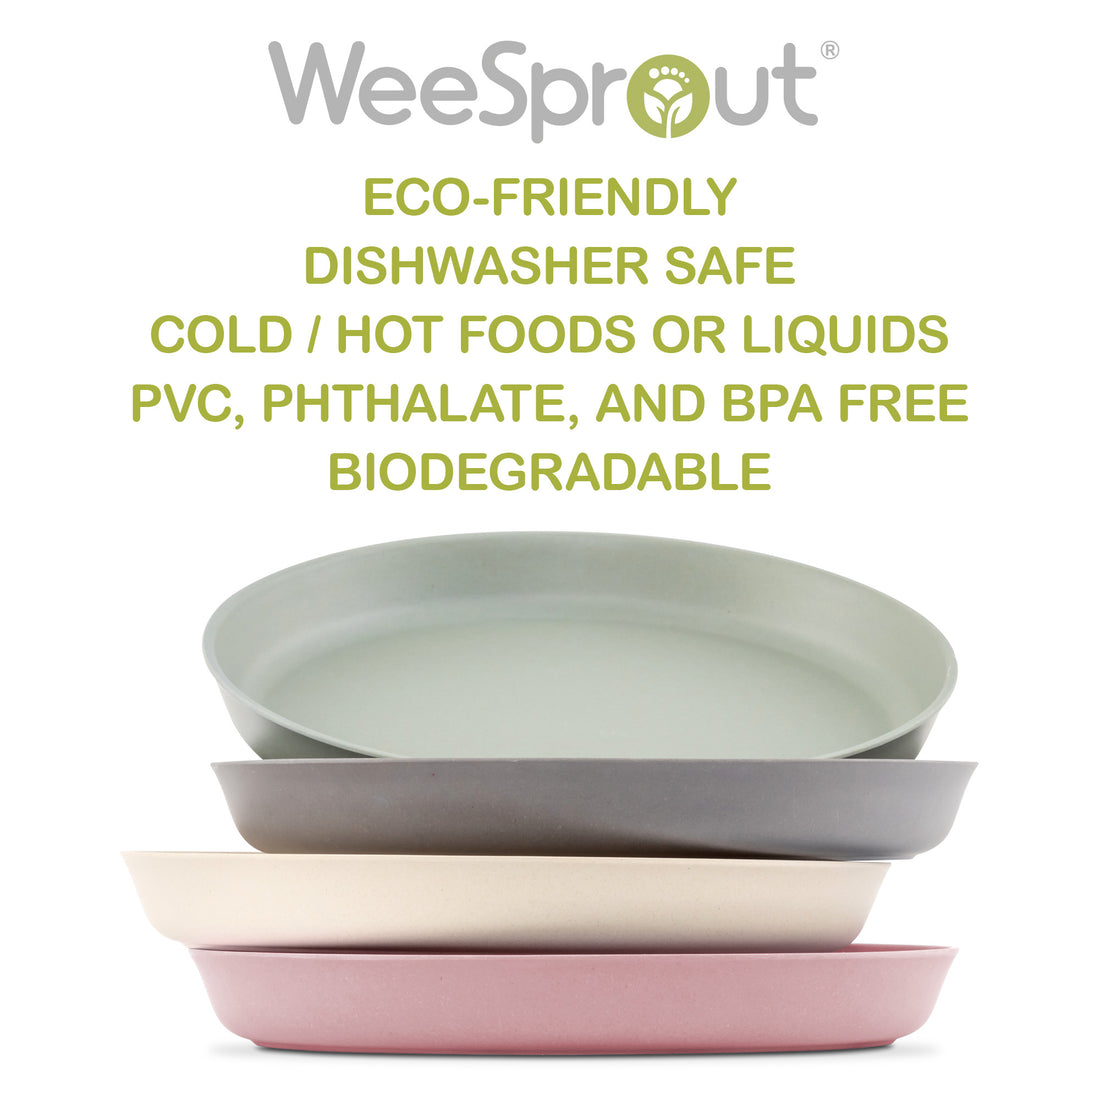 WeeSprout Bamboo Toddler Bowls - 4 PC Set 10 fl oz - The Best Premium Eco Friend